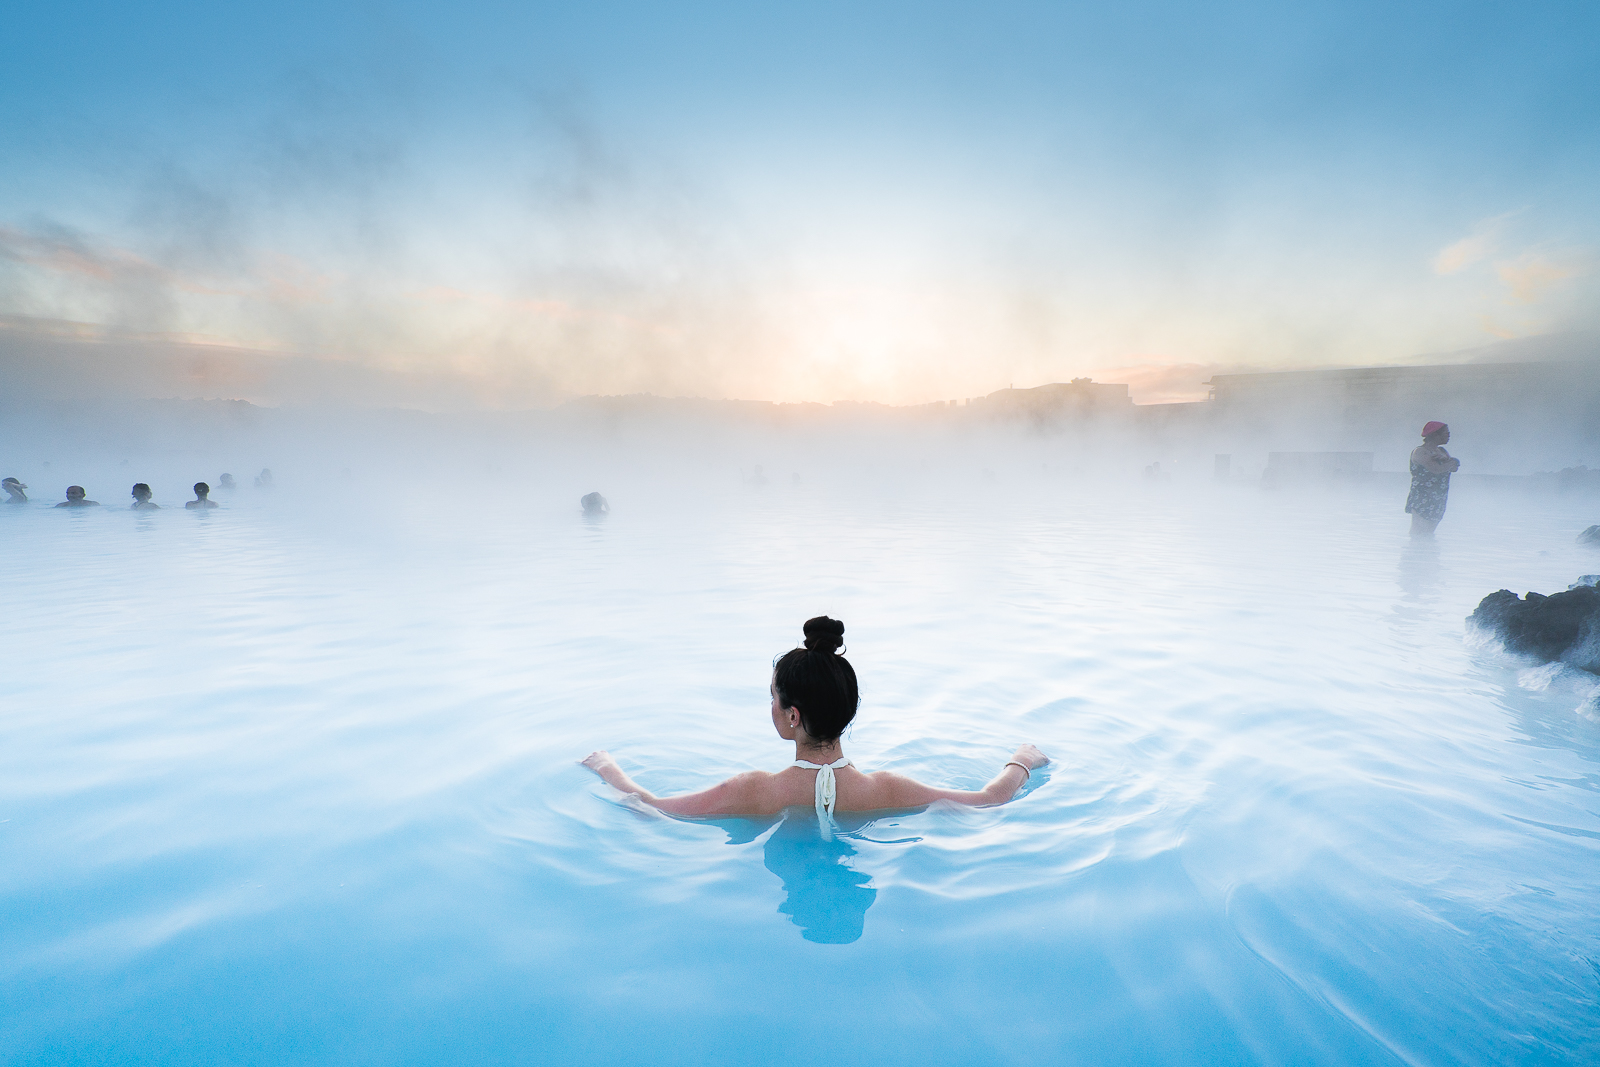 The Blue Lagoon provides an enjoyable experience throughout the year.